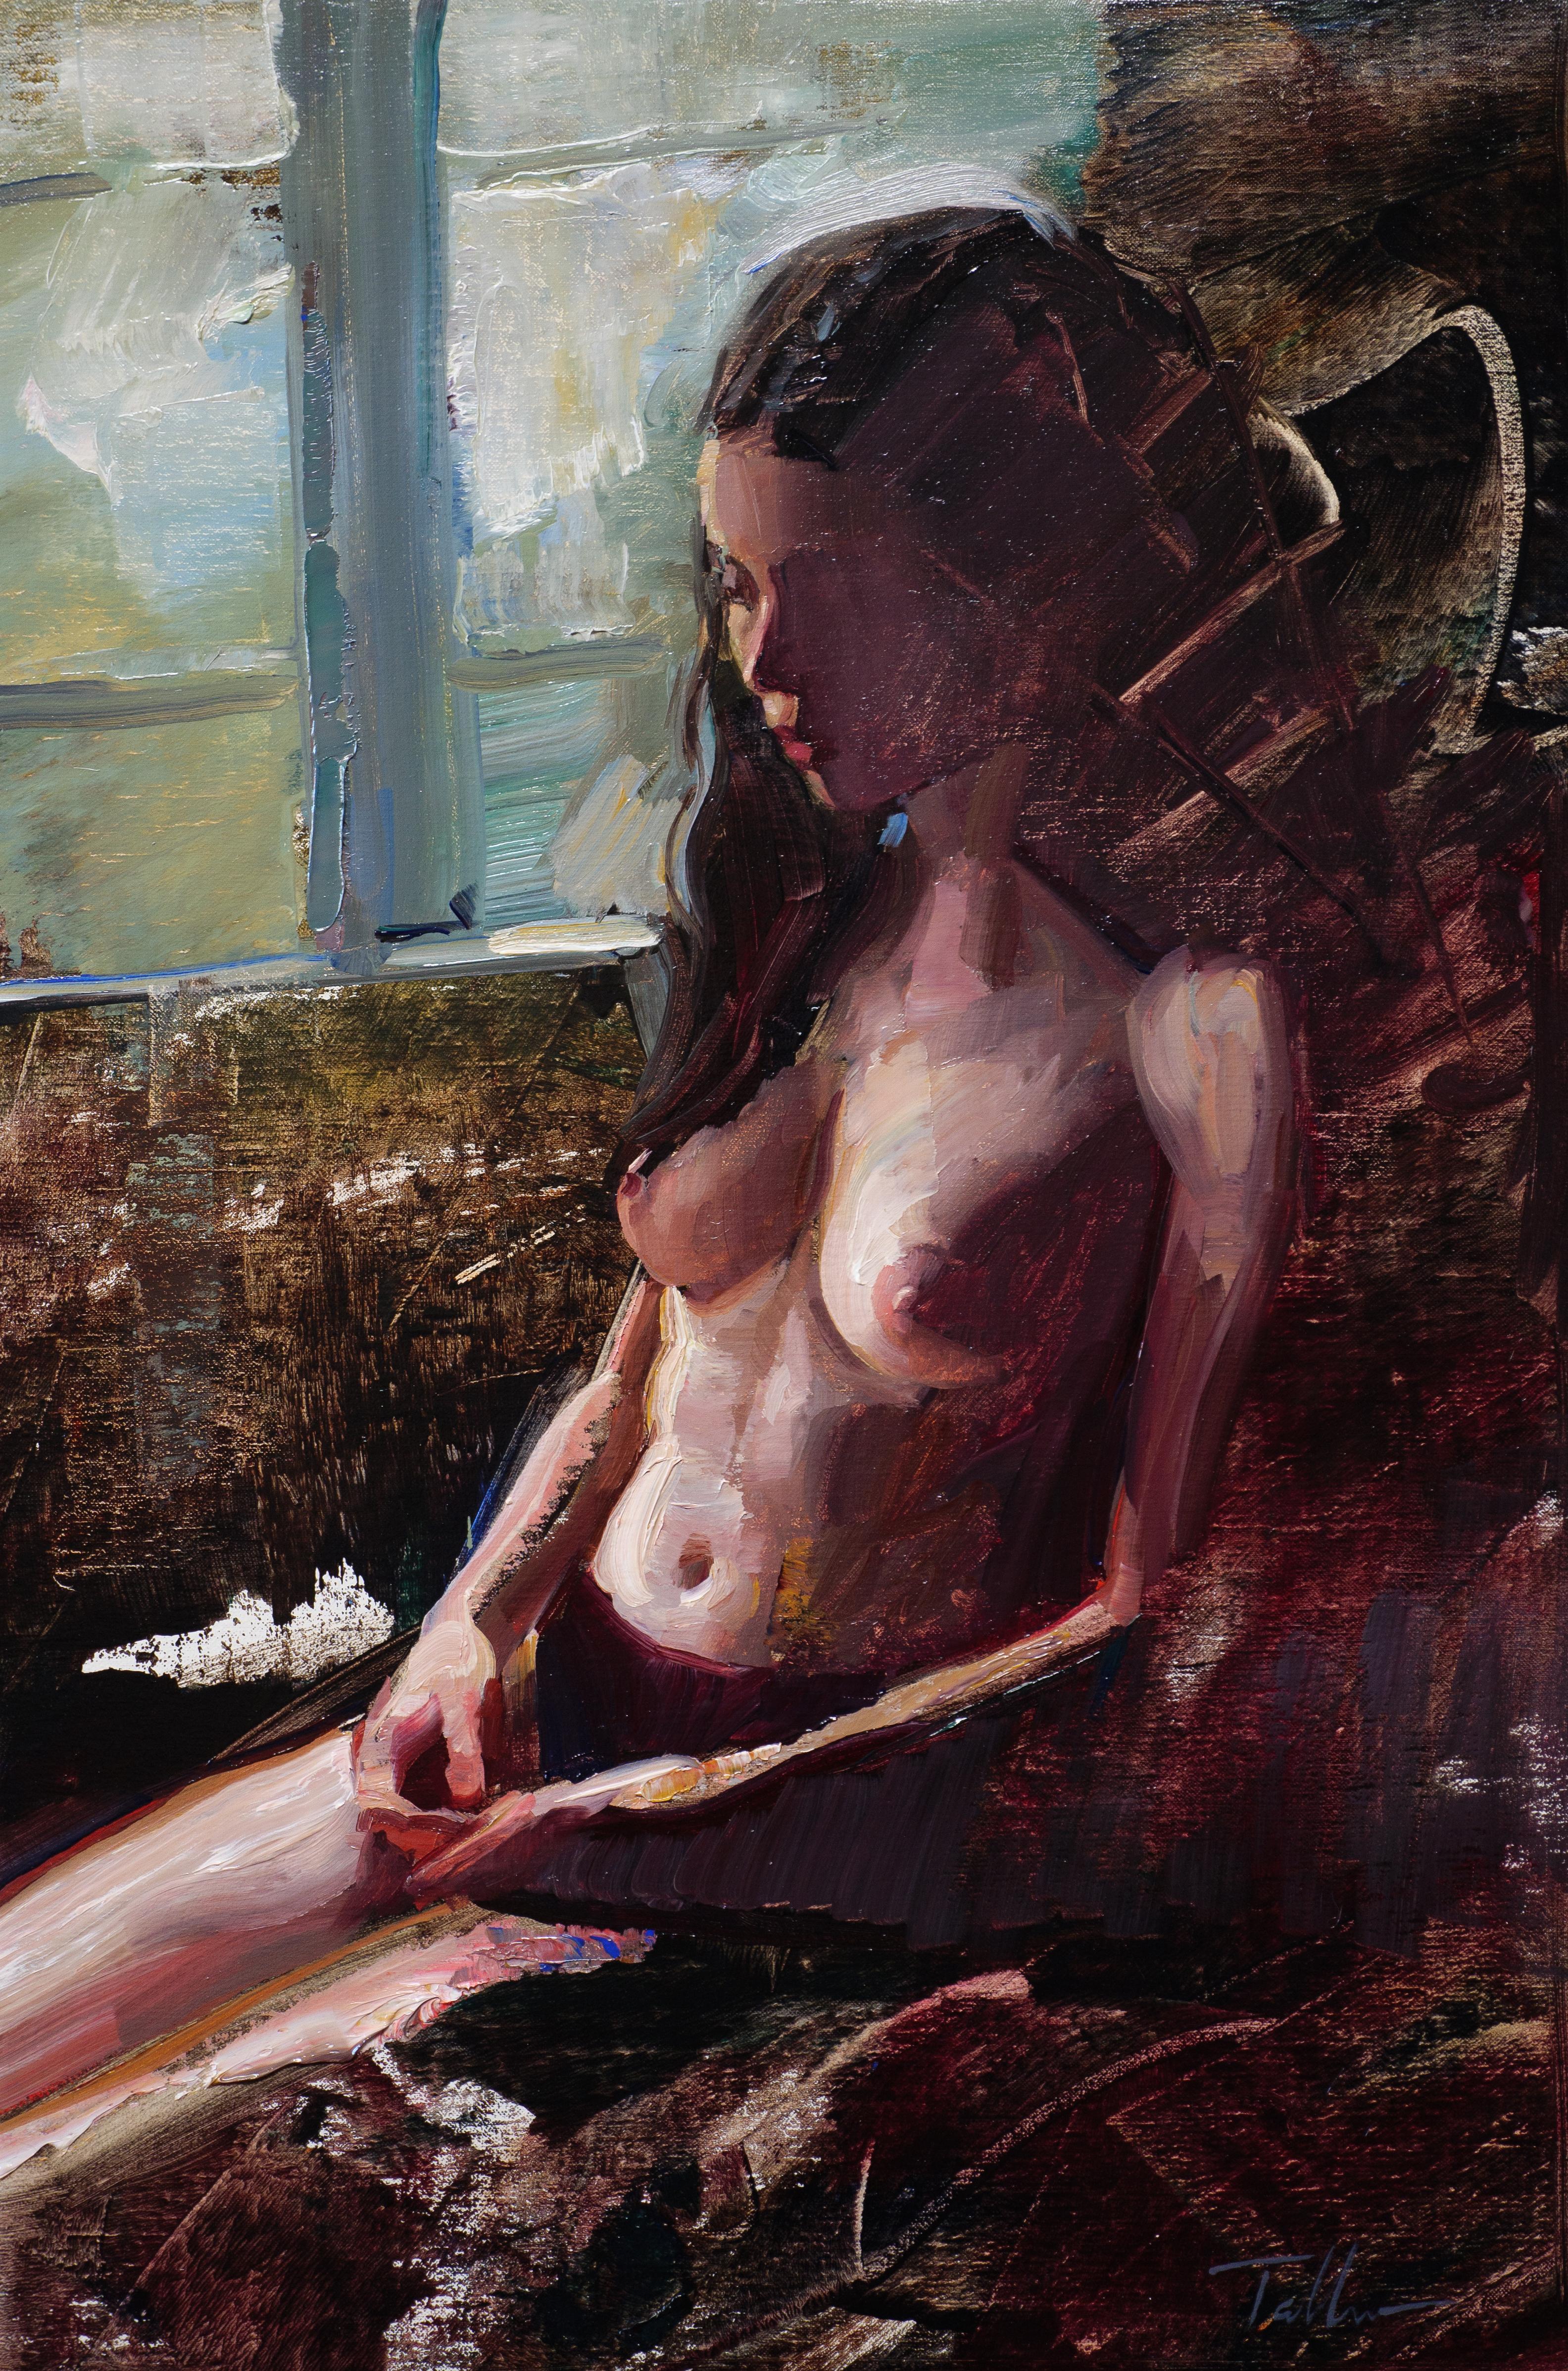 Matt Talbert's "Stillness" (2024) is an oil painting on linen, measuring 21 x 14 inches (53.34 x 35.56 cm). The unframed artwork features a nude female figure seated beside a window, with natural light filtering through the panes. Talbert's